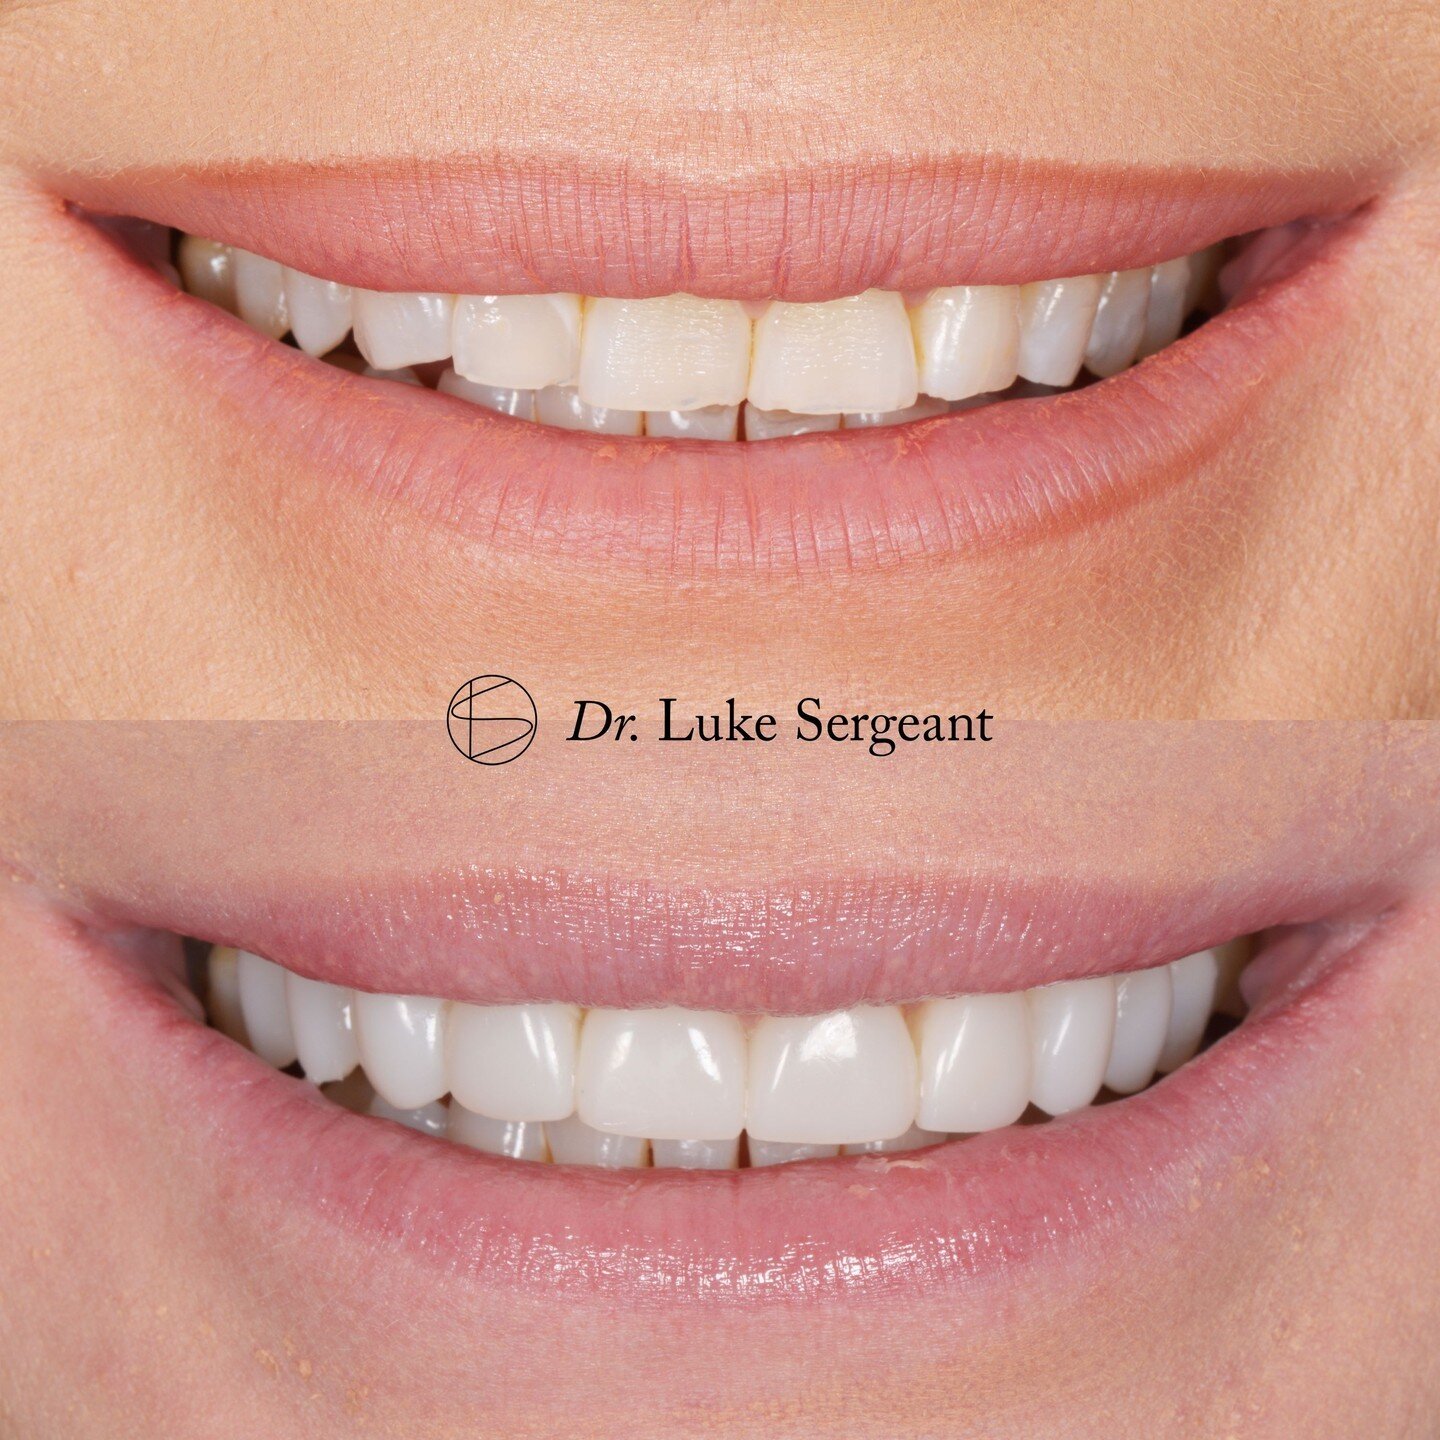 This client dreamt of a brighter, more even and symmetrical, fuller smile. We brought this to life with tooth whitening, smile design and 10x composite veneers in &quot;softened&quot; style! ✨

#compositeveneers #smiledesign #smiletransformation